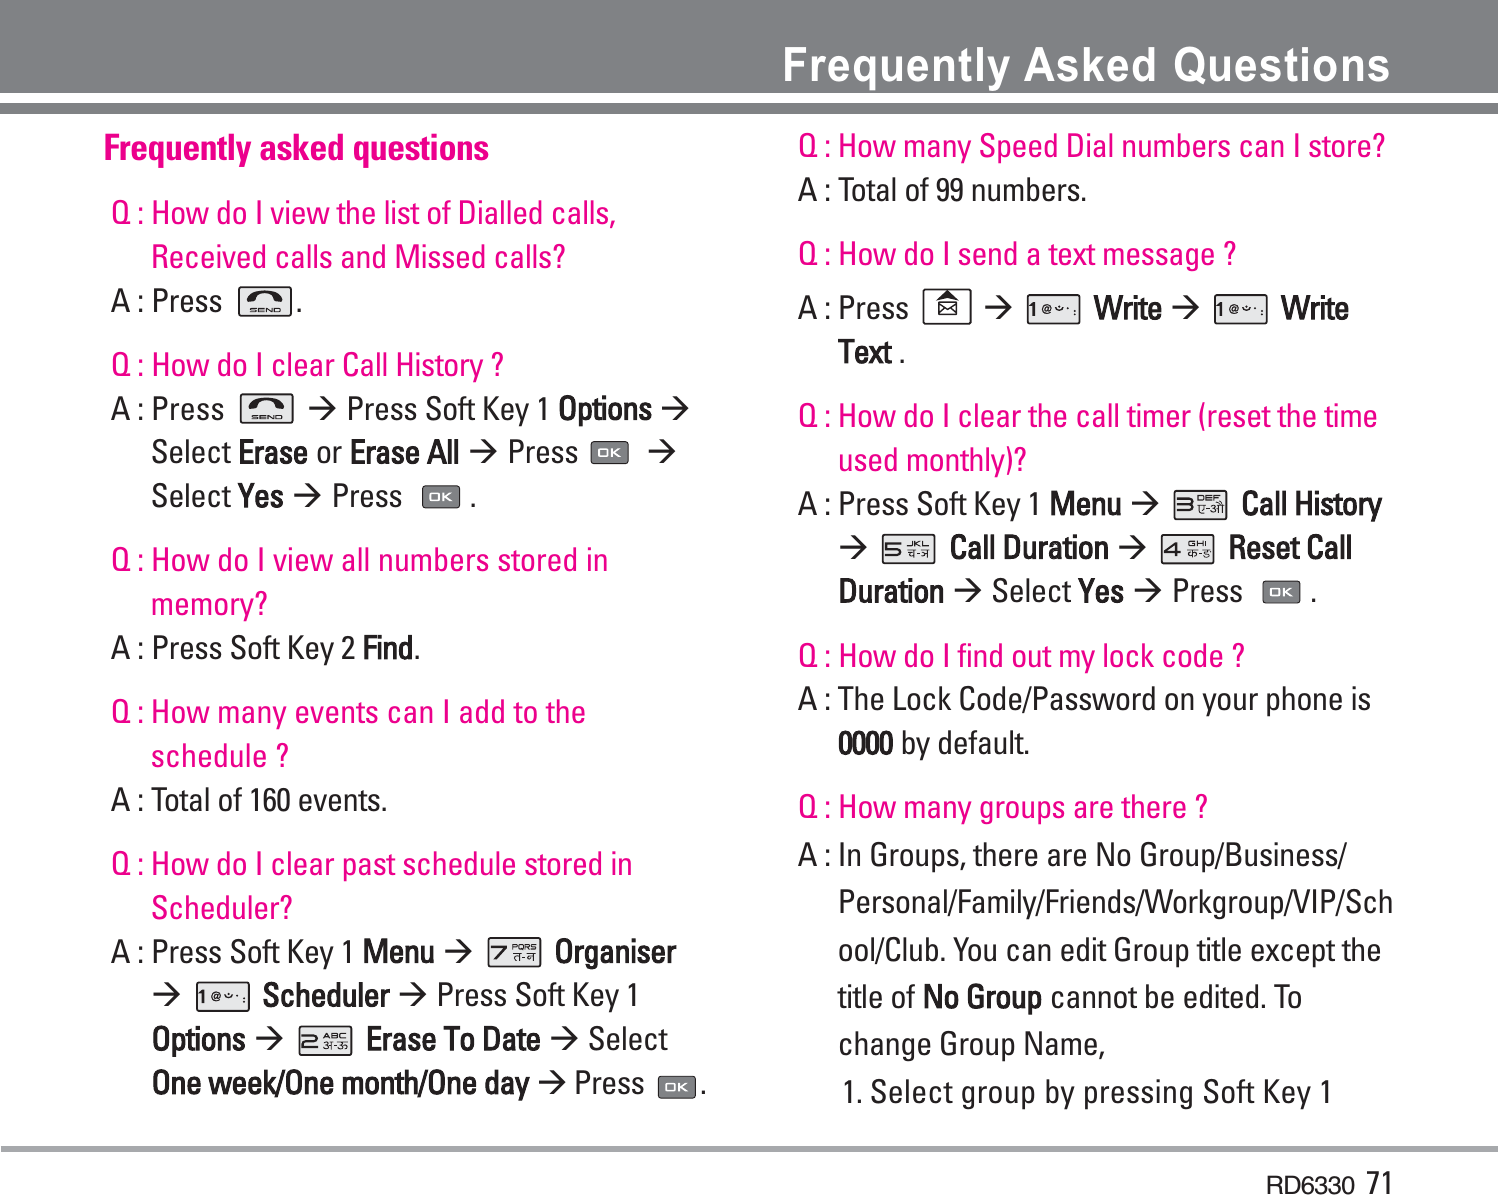 RD6330 71Frequently Asked QuestionsFrequently asked questionsQ : How do I view the list of Dialled calls,Received calls and Missed calls? A : Press  .Q : How do I clear Call History ? A : Press  Press Soft Key 1 Options Select Erase or Erase All Press Select Yes Press .Q : How do I view all numbers stored inmemory?A : Press Soft Key 2 Find.Q : How many events can I add to theschedule ?A : Total of 160 events. Q : How do I clear past schedule stored inScheduler?A : Press Soft Key 1 Menu OrganiserScheduler Press Soft Key 1Options Errase To Date SelectOne week/One month/One day Press .Q : How many Speed Dial numbers can I store? A : Total of 99 numbers. Q : How do I send a text message ? A : Press  Write WriteText .Q : How do I clear the call timer (reset the timeused monthly)?A : Press Soft Key 1 Menu Call HistoryCall Duraation Reset CallDuration Select YesPress . Q : How do I find out my lock code ? A : The Lock Code/Password on your phone is0000 by default.Q : How many groups are there ? A : In Groups, there are No Group/Business/Personal/Family/Friends/Workgroup/VIP/School/Club. You can edit Group title except thetitle of No Group cannot be edited. Tochange Group Name,1. Select group by pressing Soft Key 1